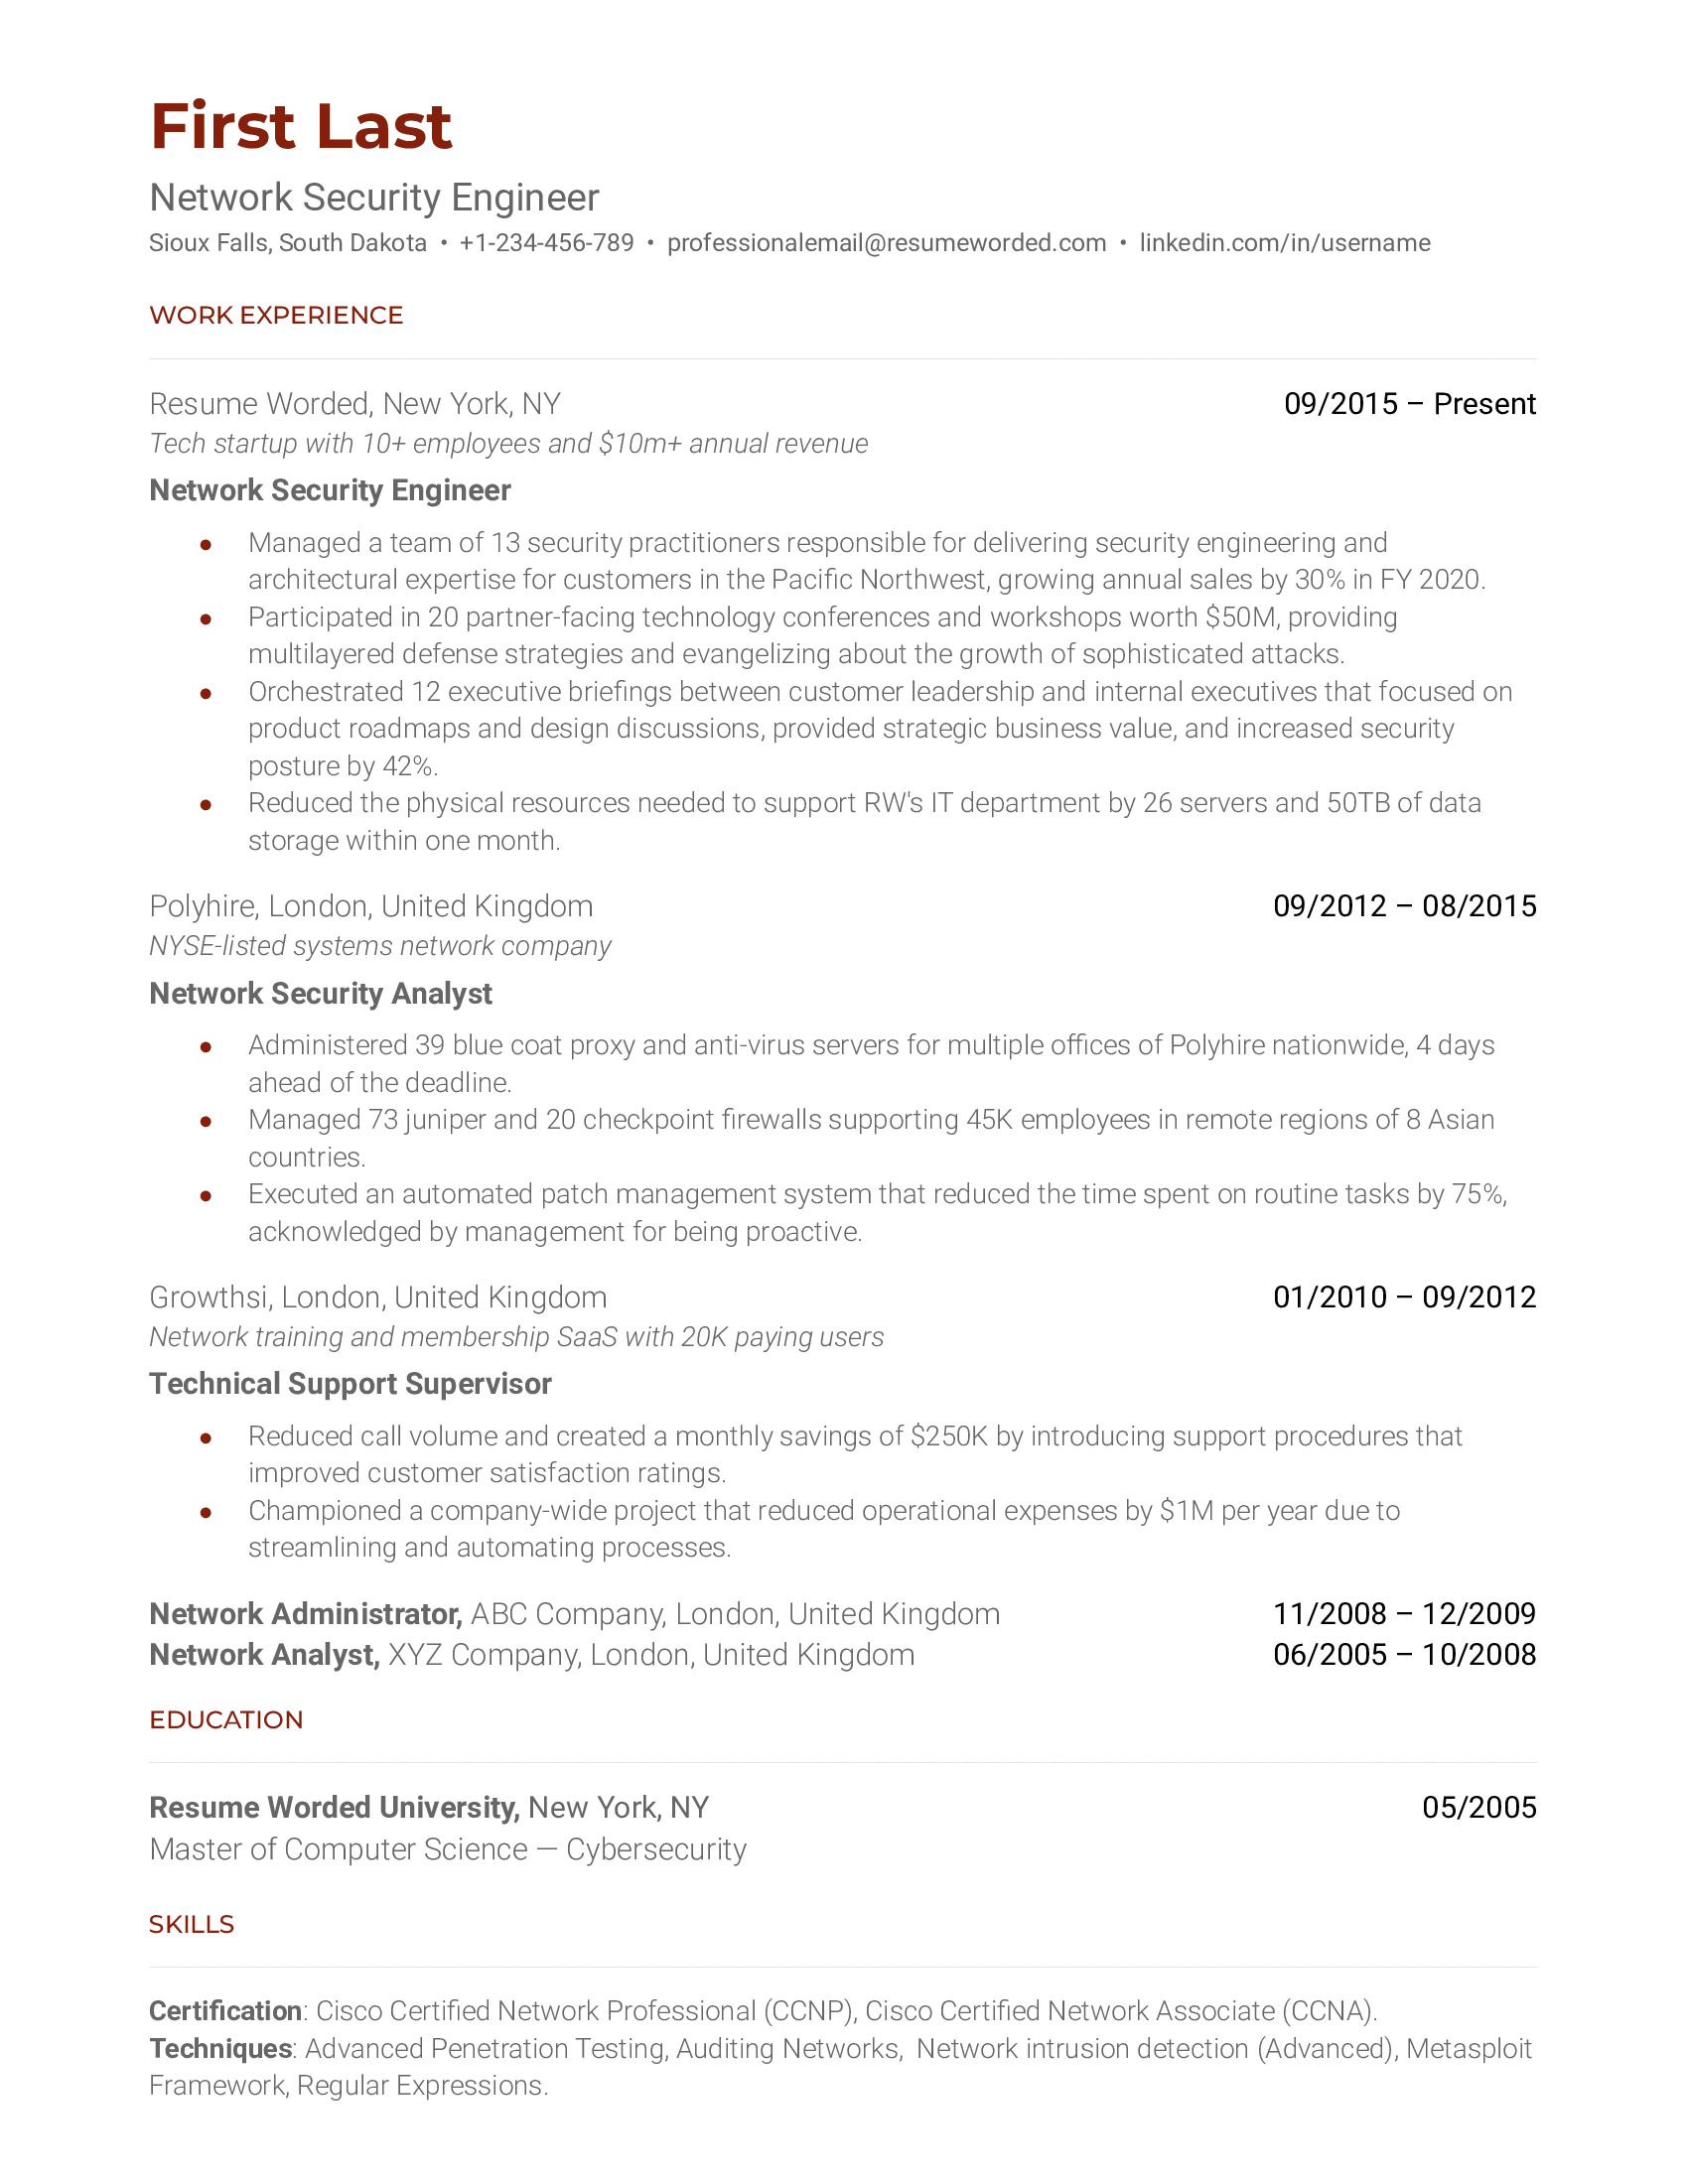 A CV of a Network Security Engineer showcasing their skills, experiences and proficiency in security software.